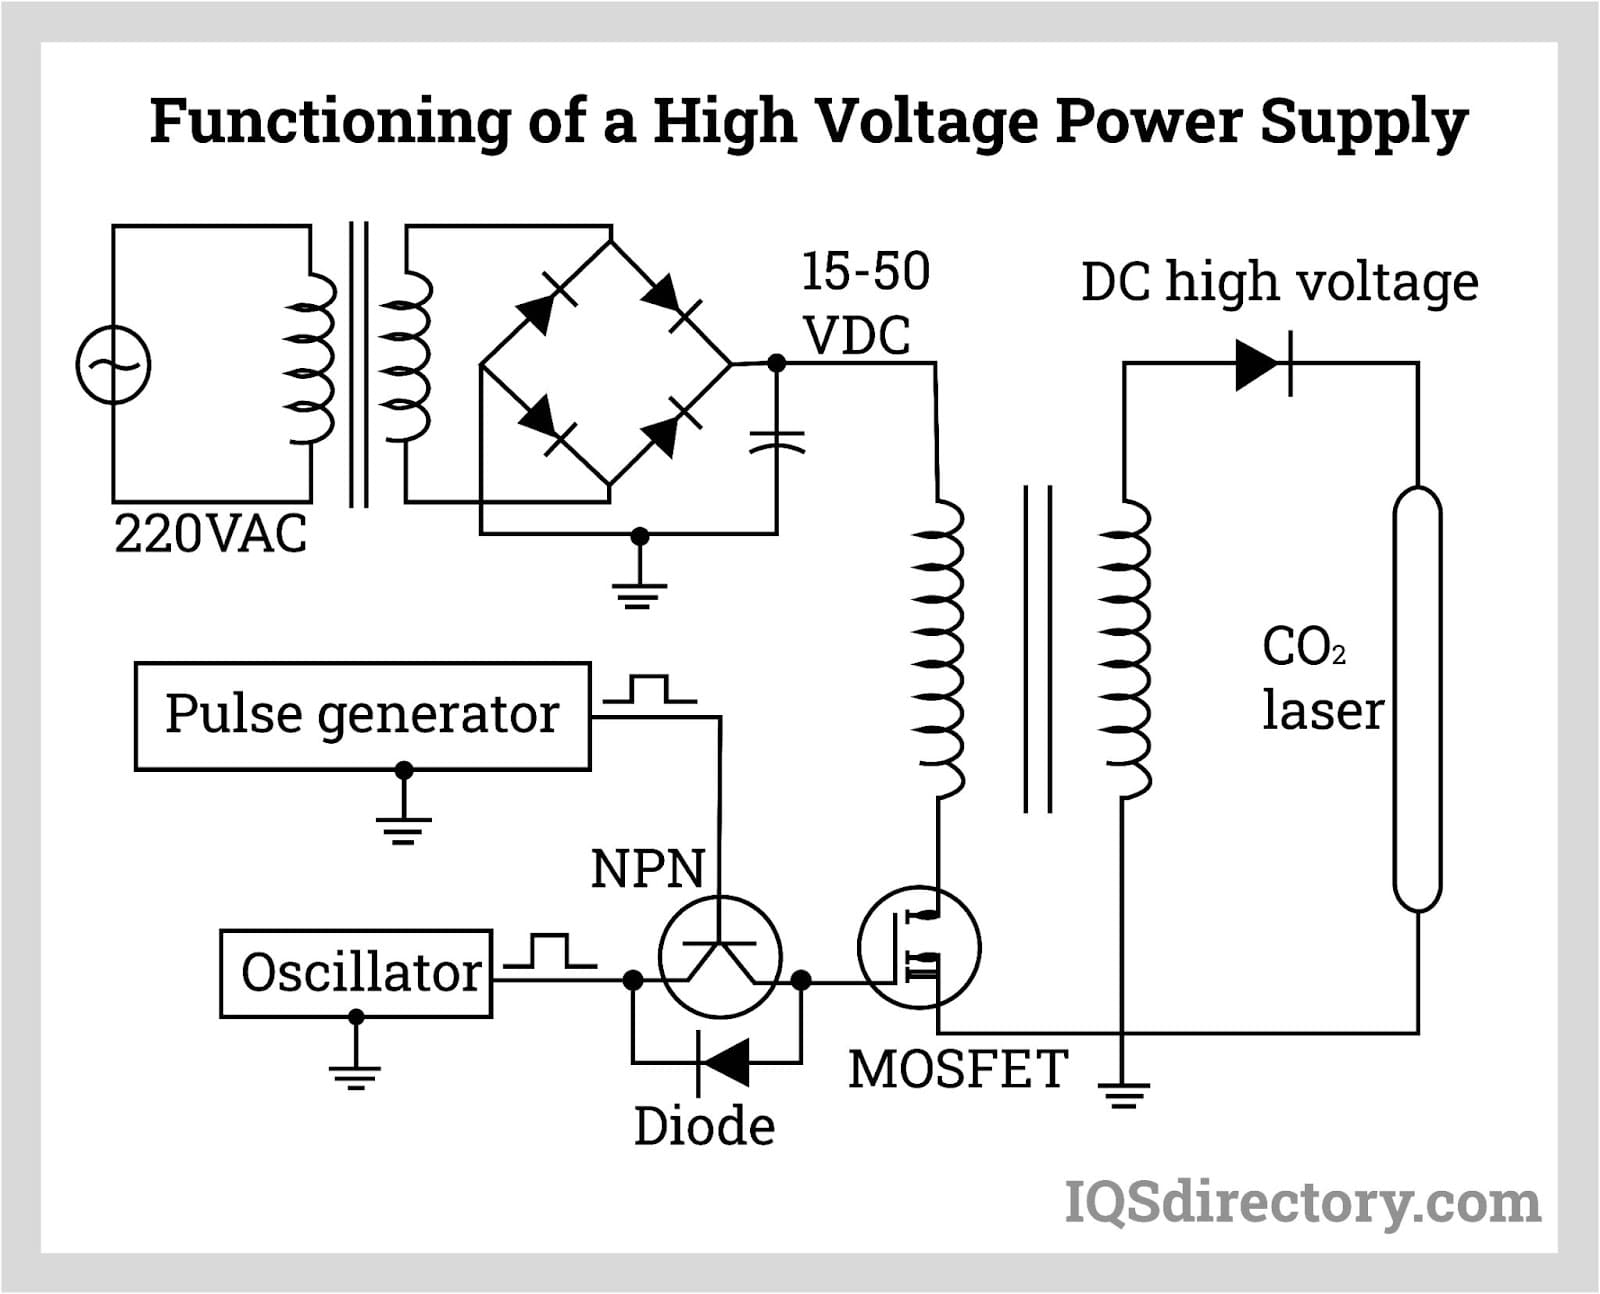 Functioning of a High Voltage Power Supply